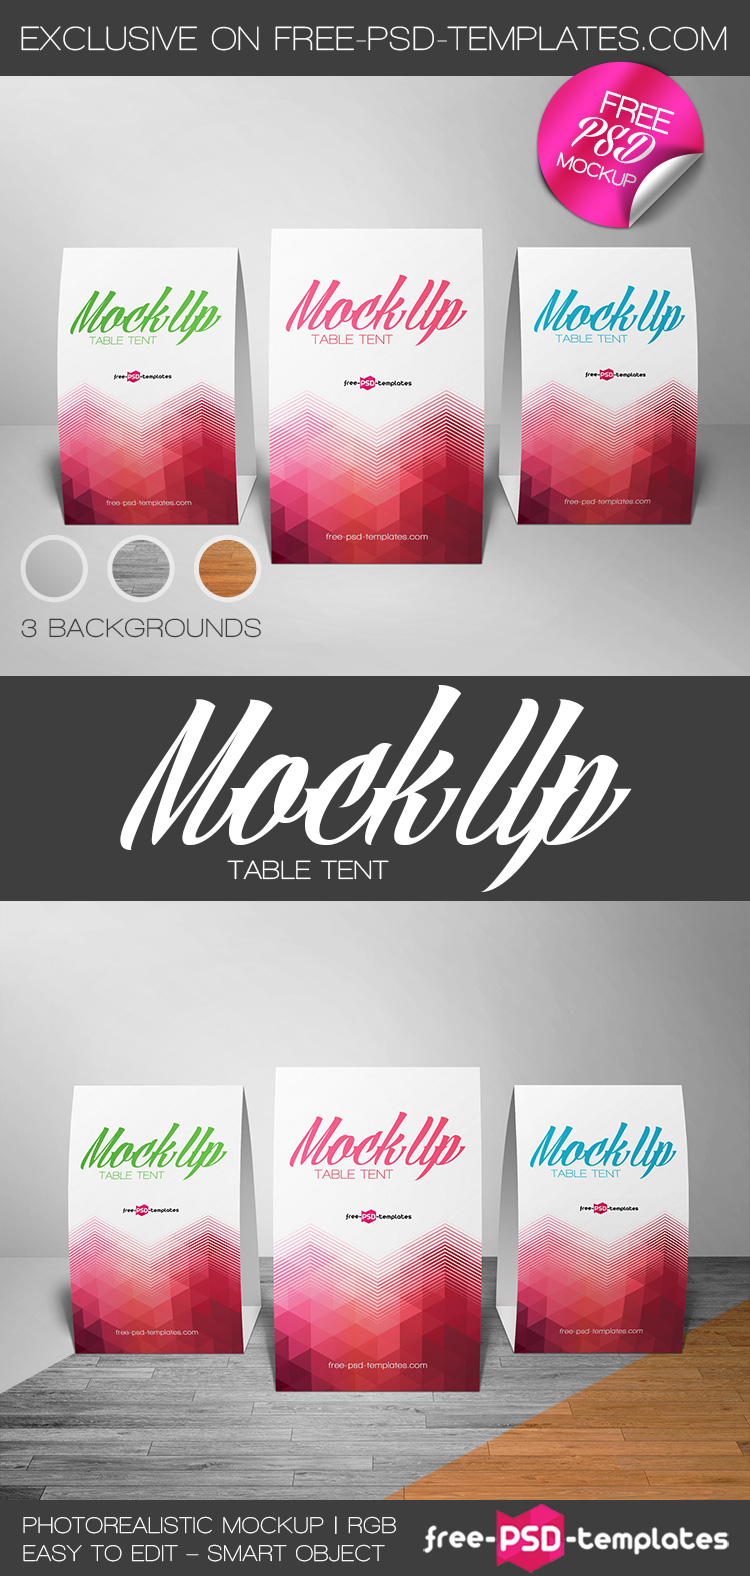 Download Free Table Tent Mock-up in PSD | Free PSD Templates